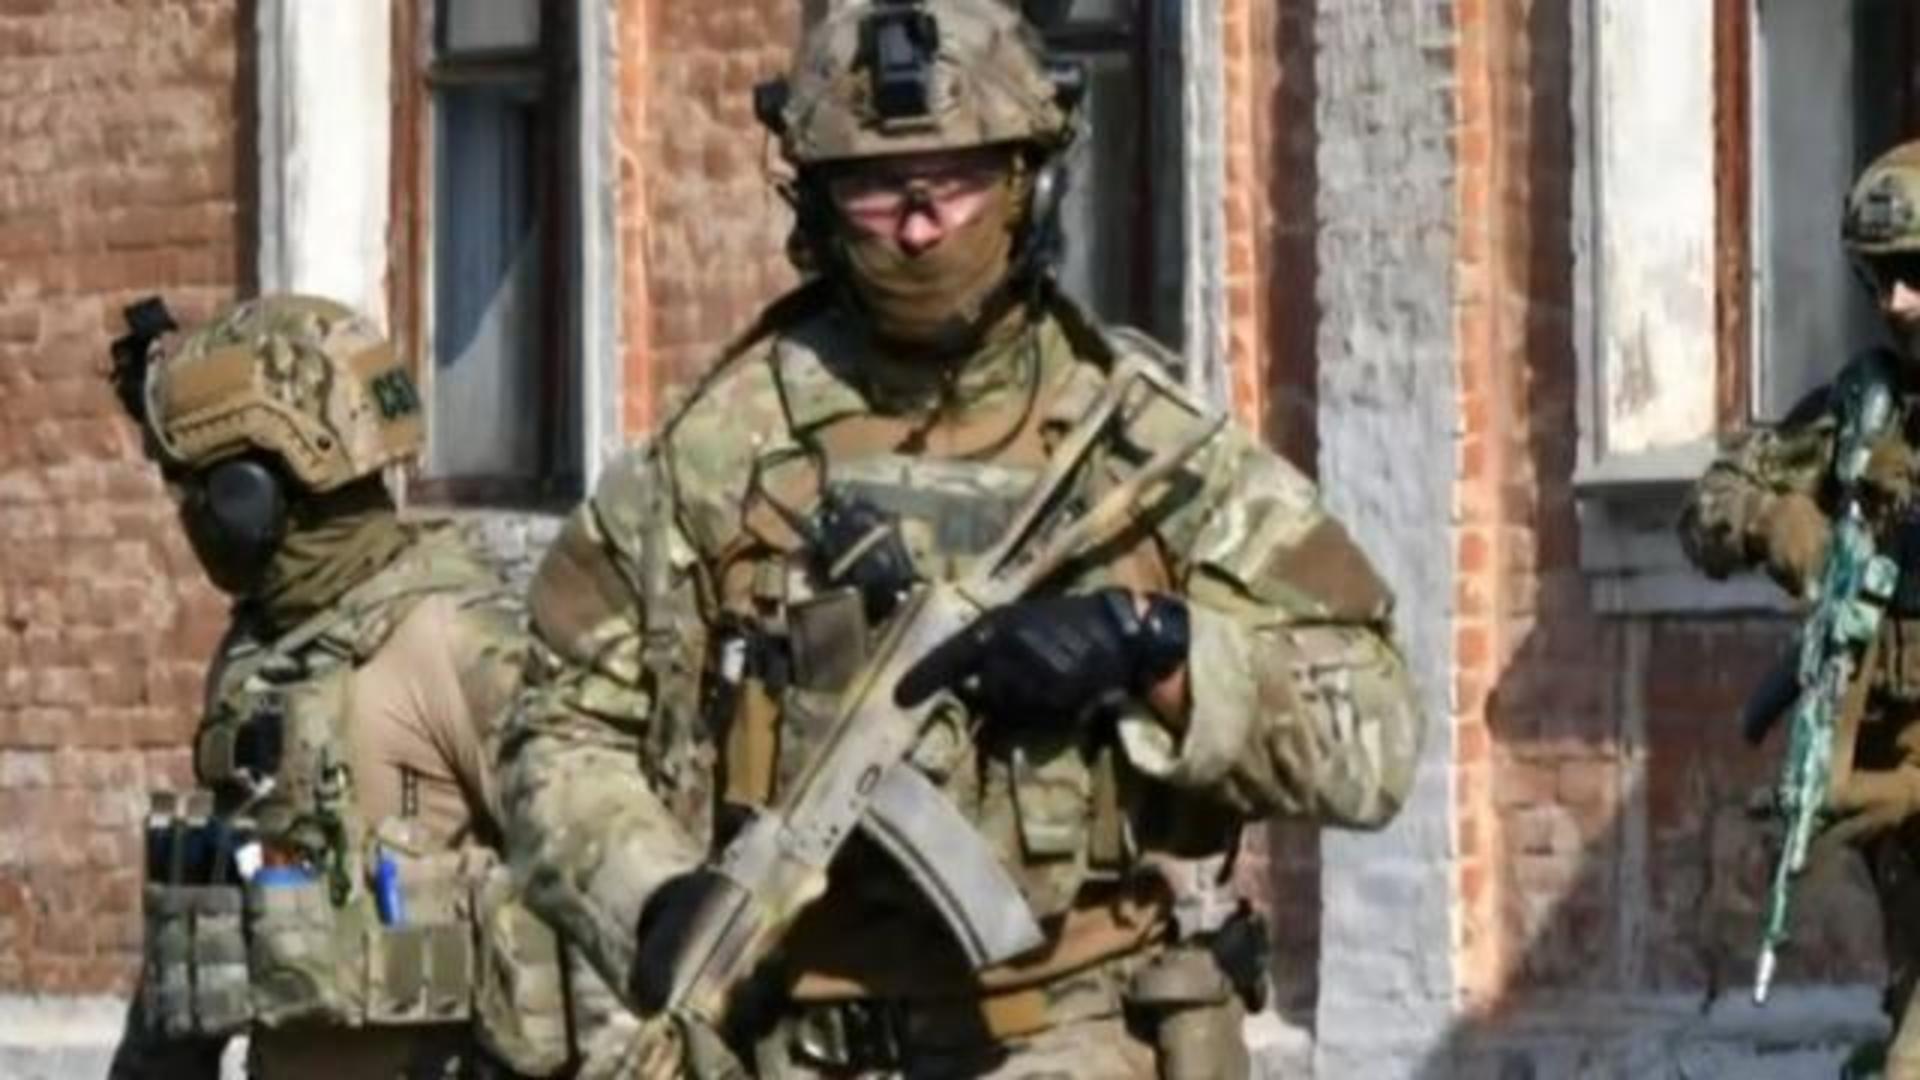 U.S. could deploy troops to support Ukraine